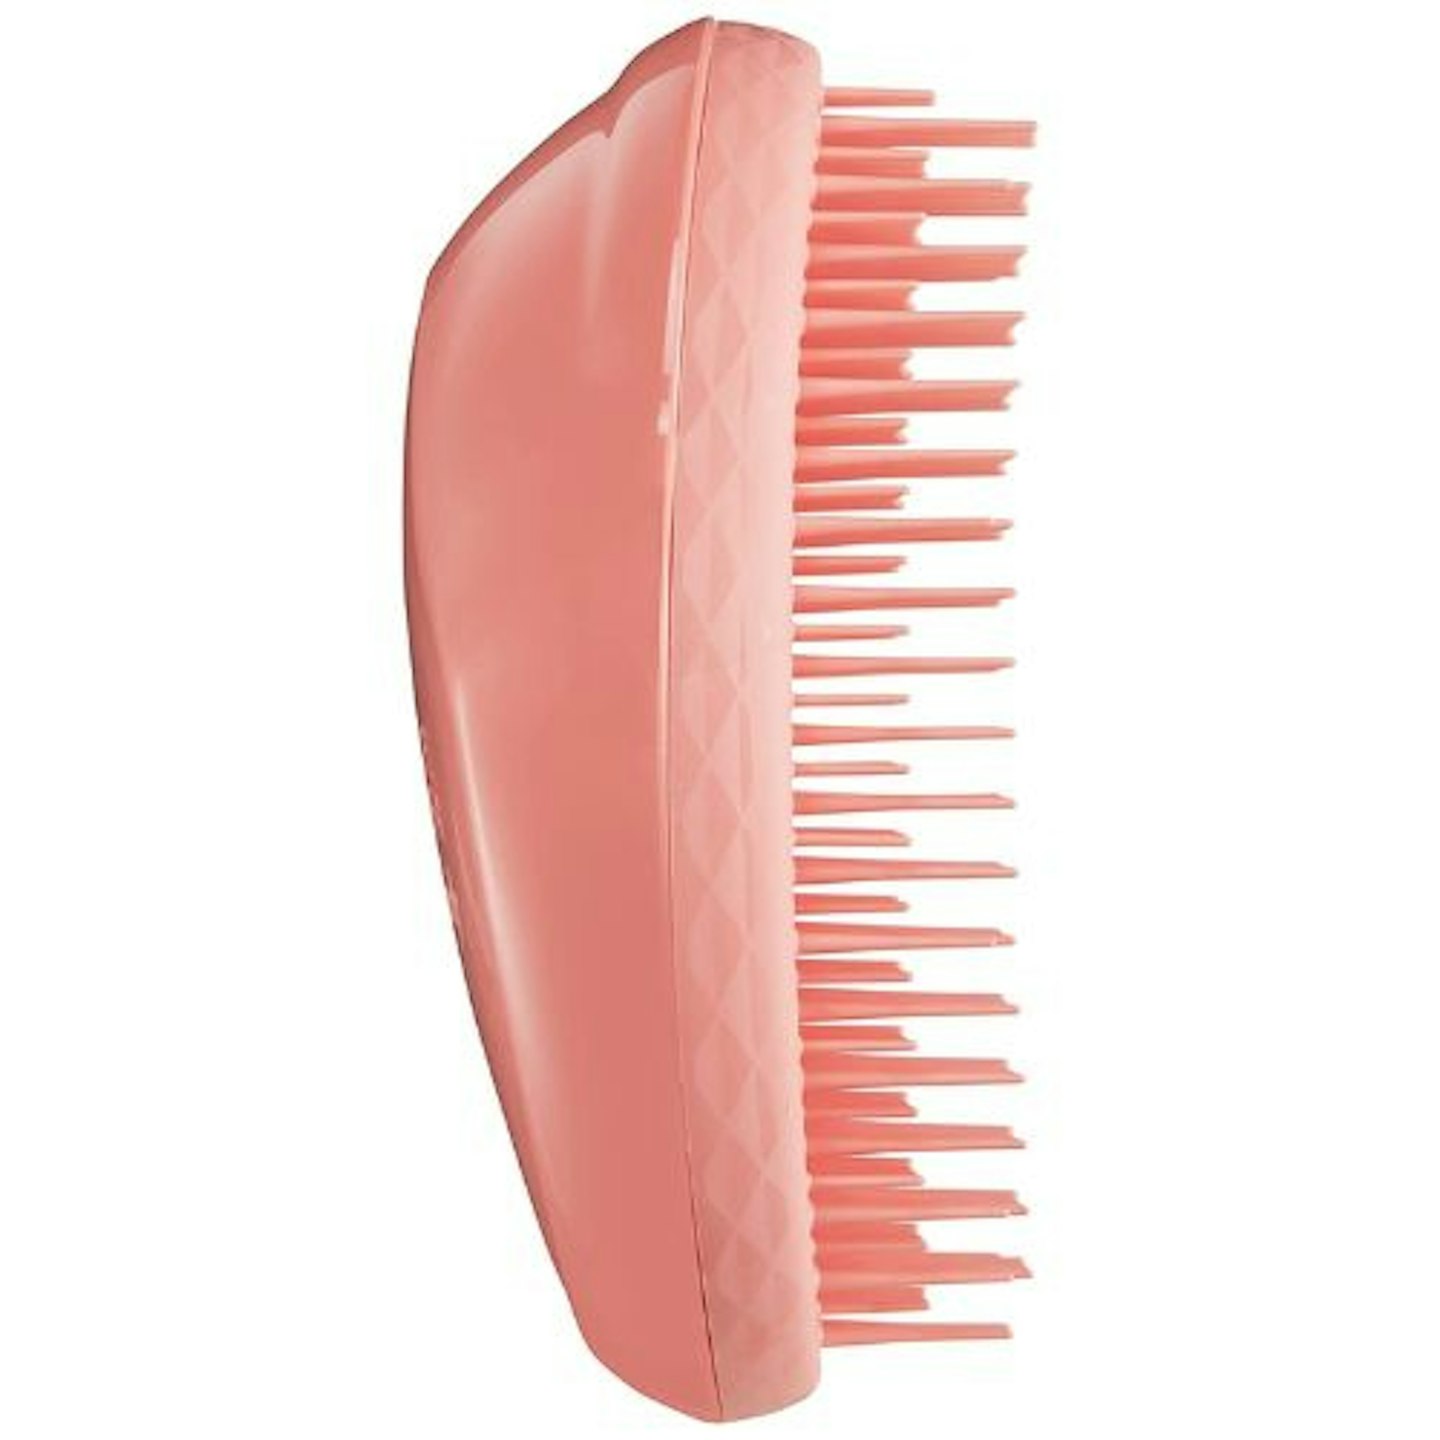 Tangle Teezer The Thick and Curly Detangling Hairbrush